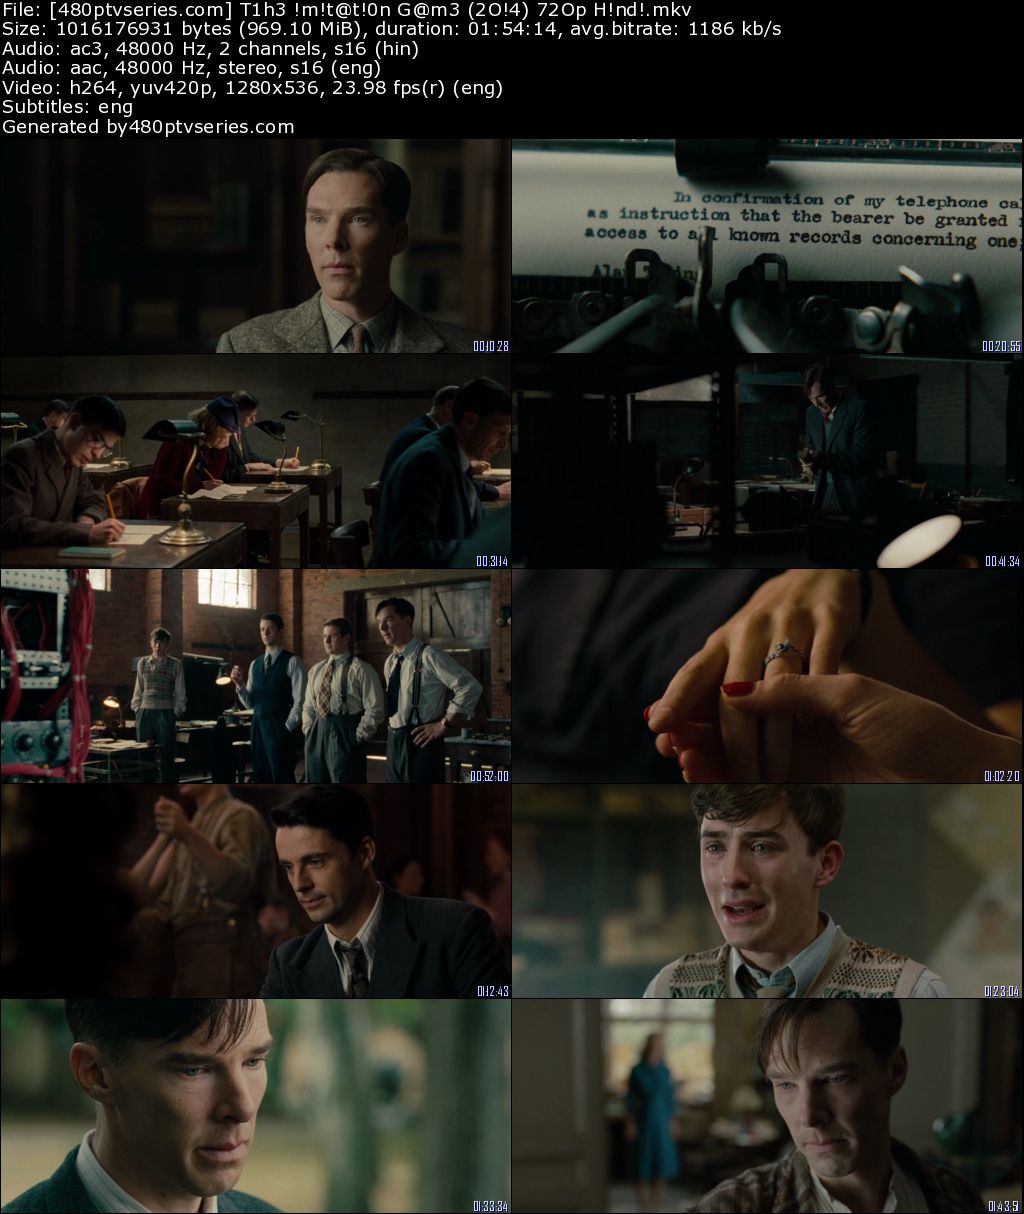 Download The Imitation Game (2014) 950Mb Full Hindi Dual Audio Movie Download 720p Bluray Free Watch Online Full Movie Download Worldfree4u 9xmovies